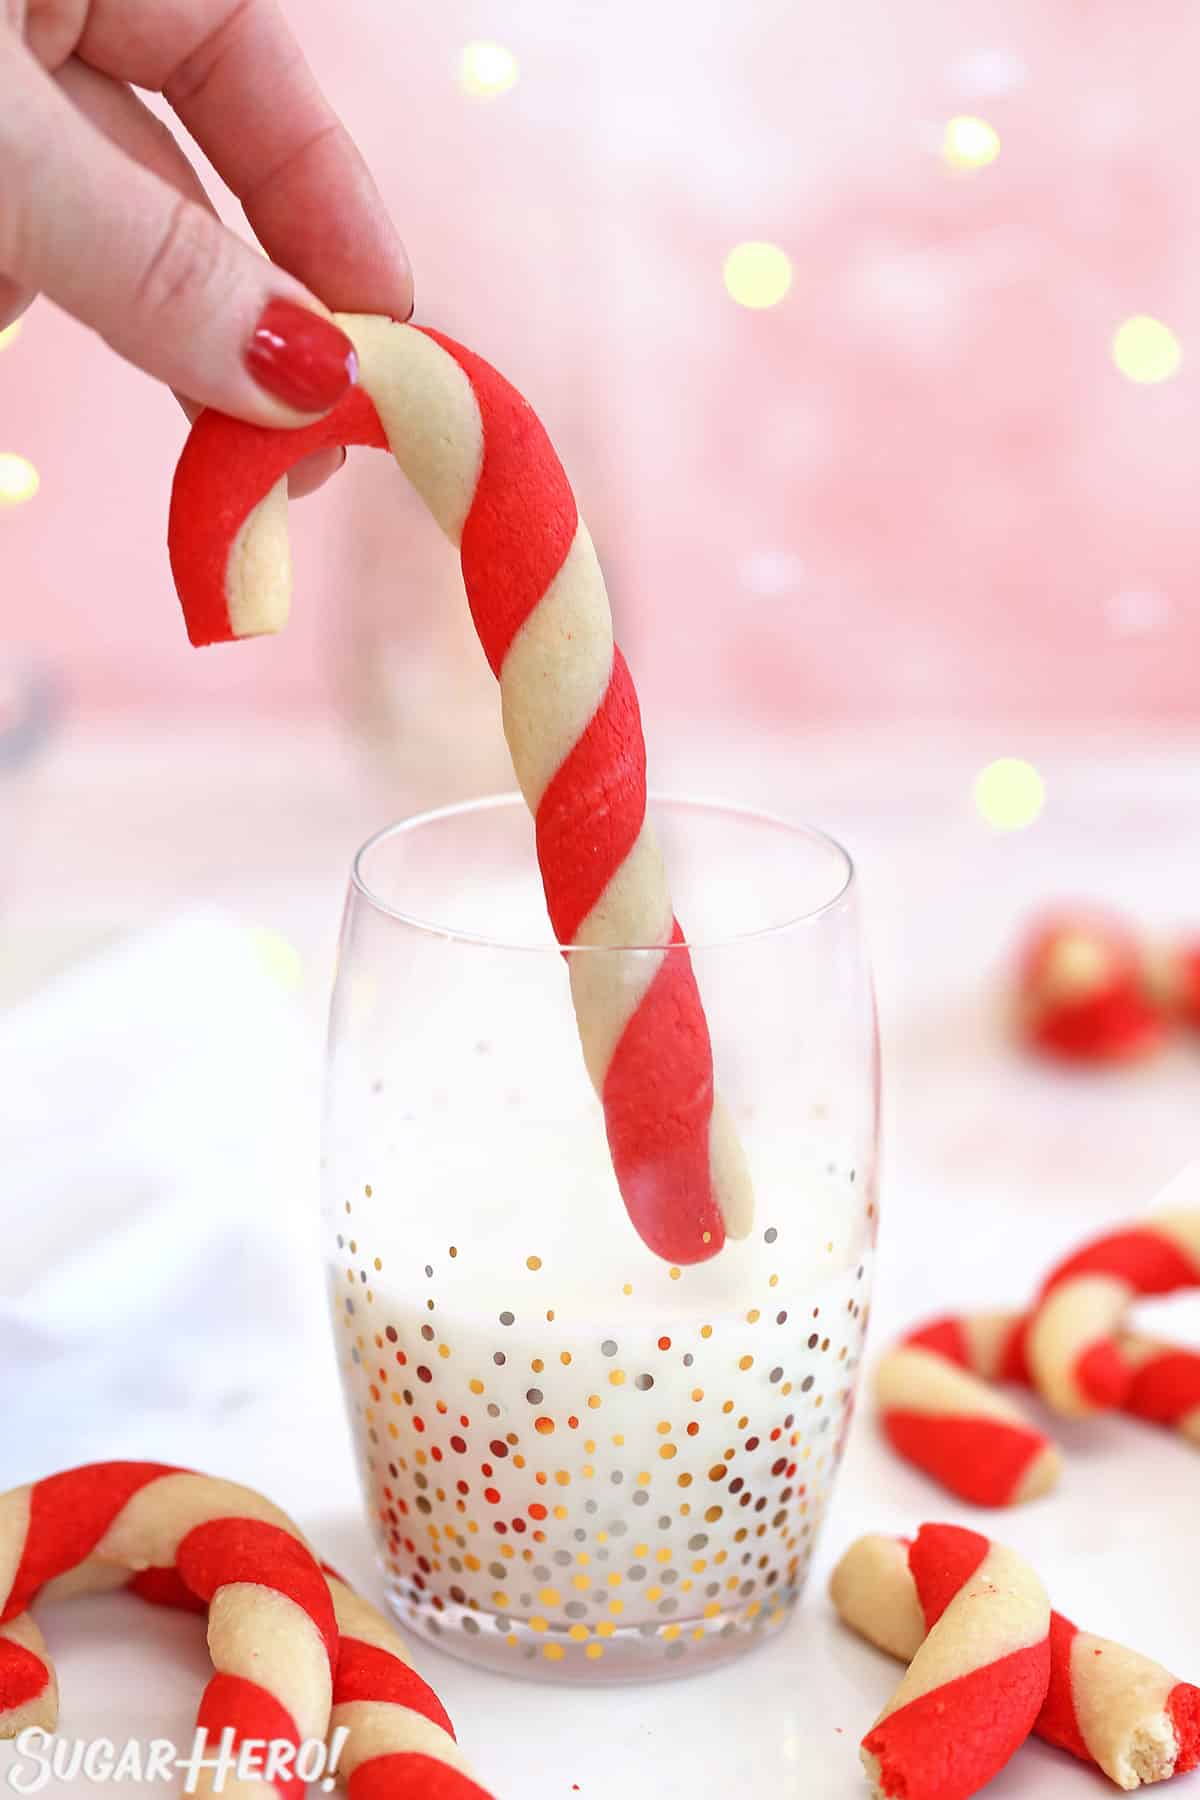 Hand about to dunk a candy cane cookie into a glass of milk.